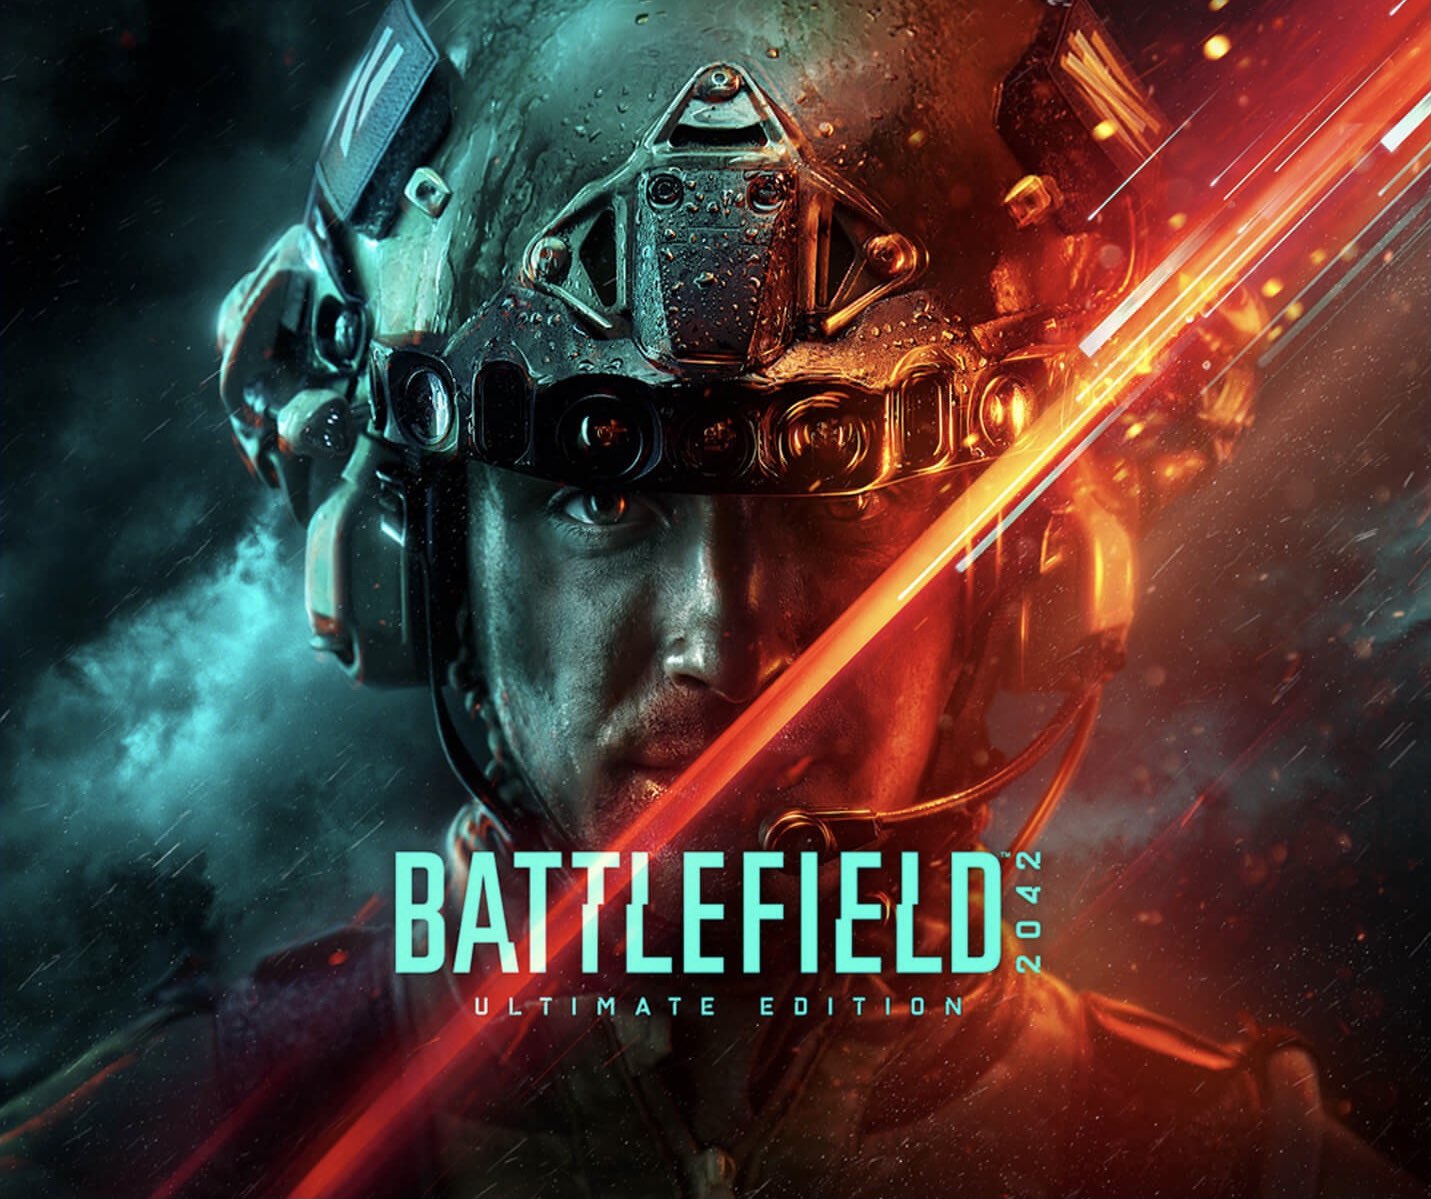 This is the new Battlefield 2042 Ultimate Edition cover